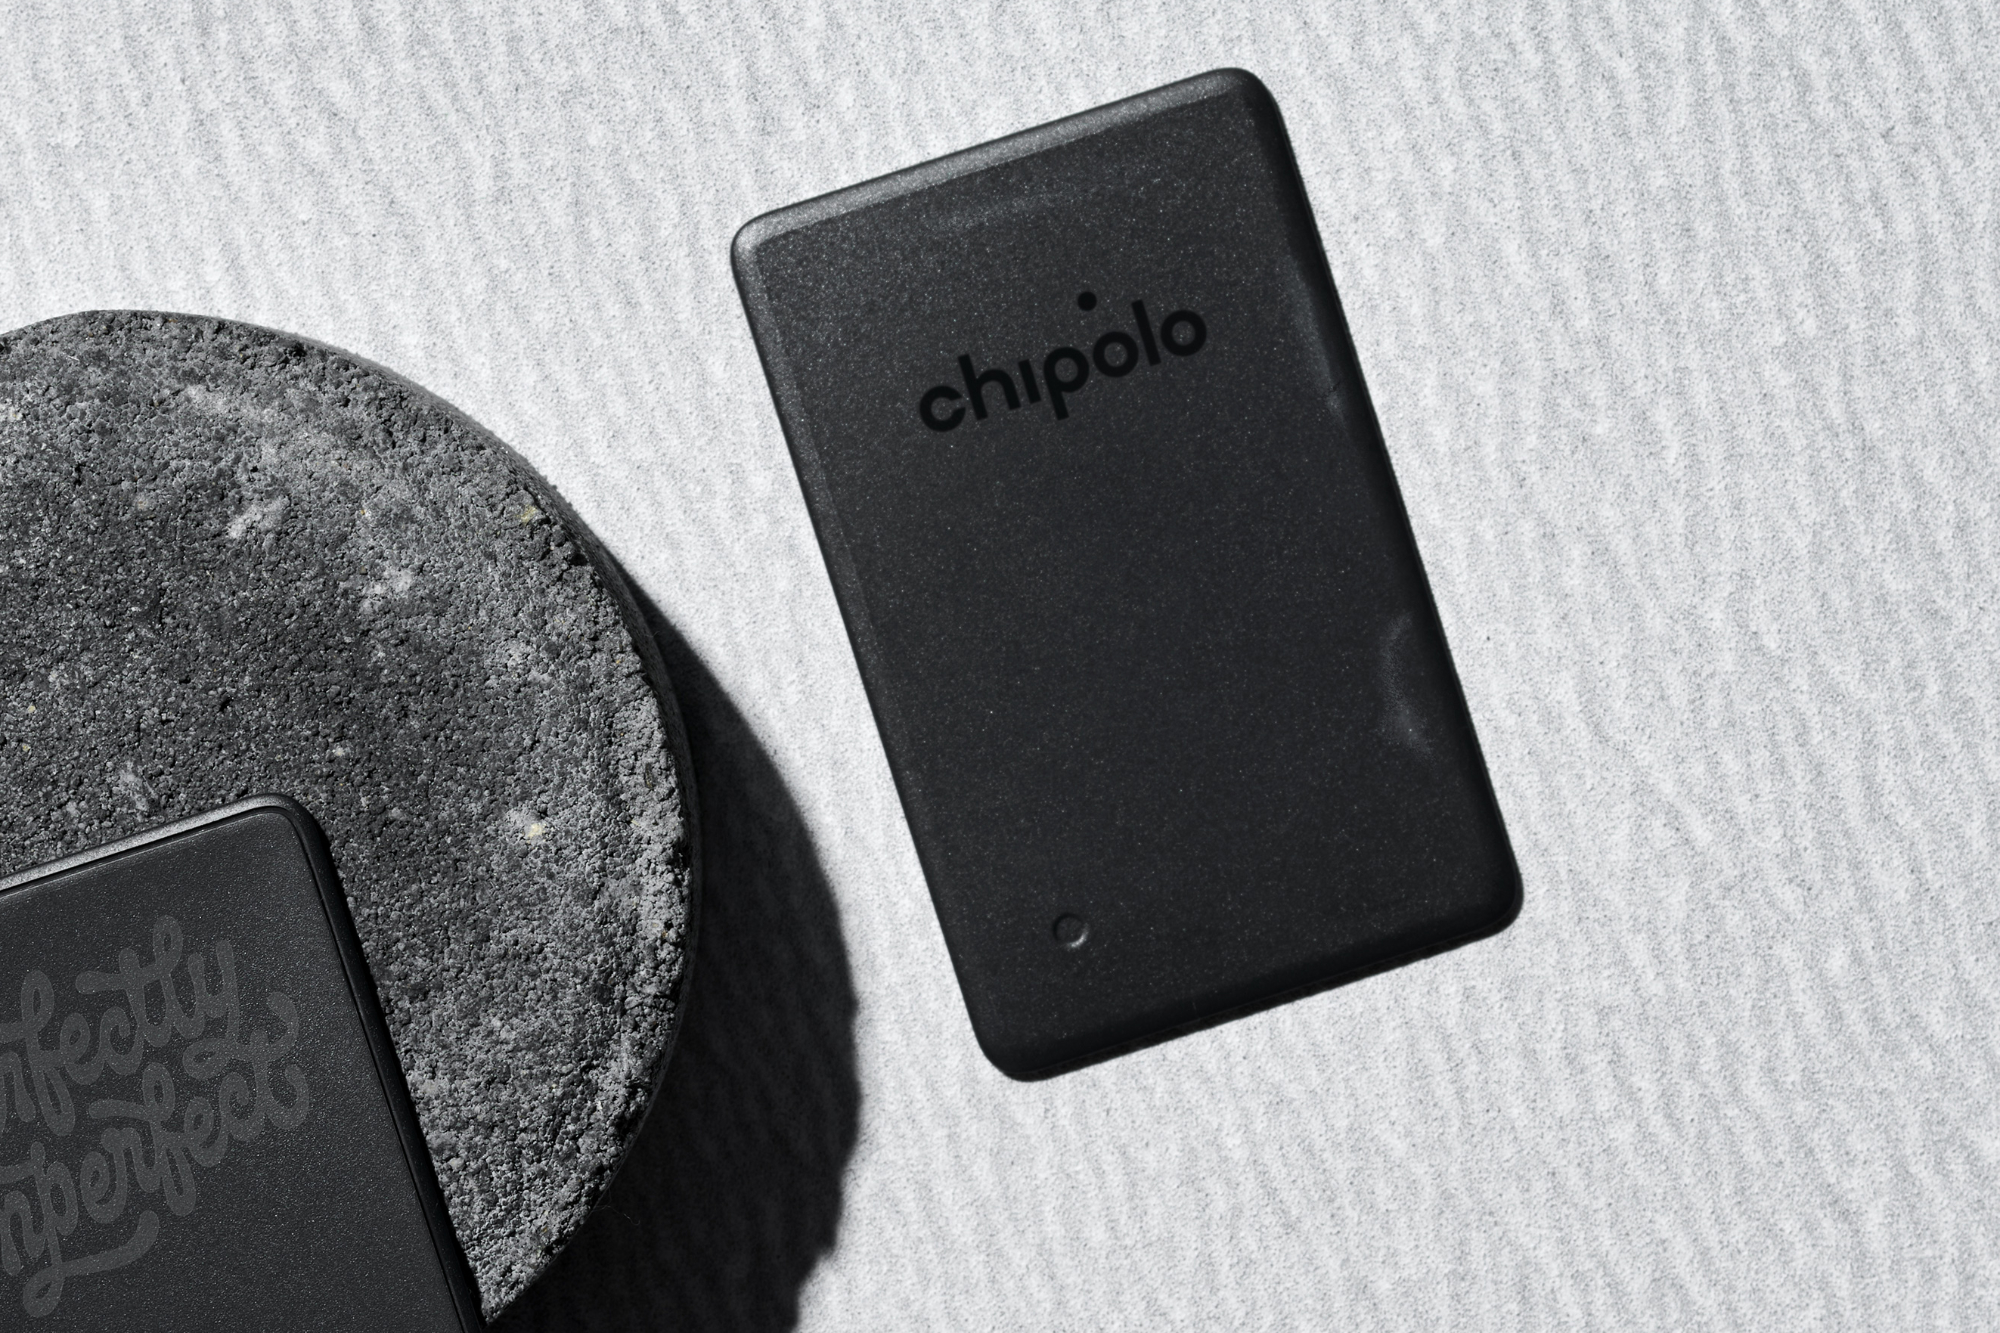 Chipolo Is Another Thing That Lets You Track Lost Items Using Your